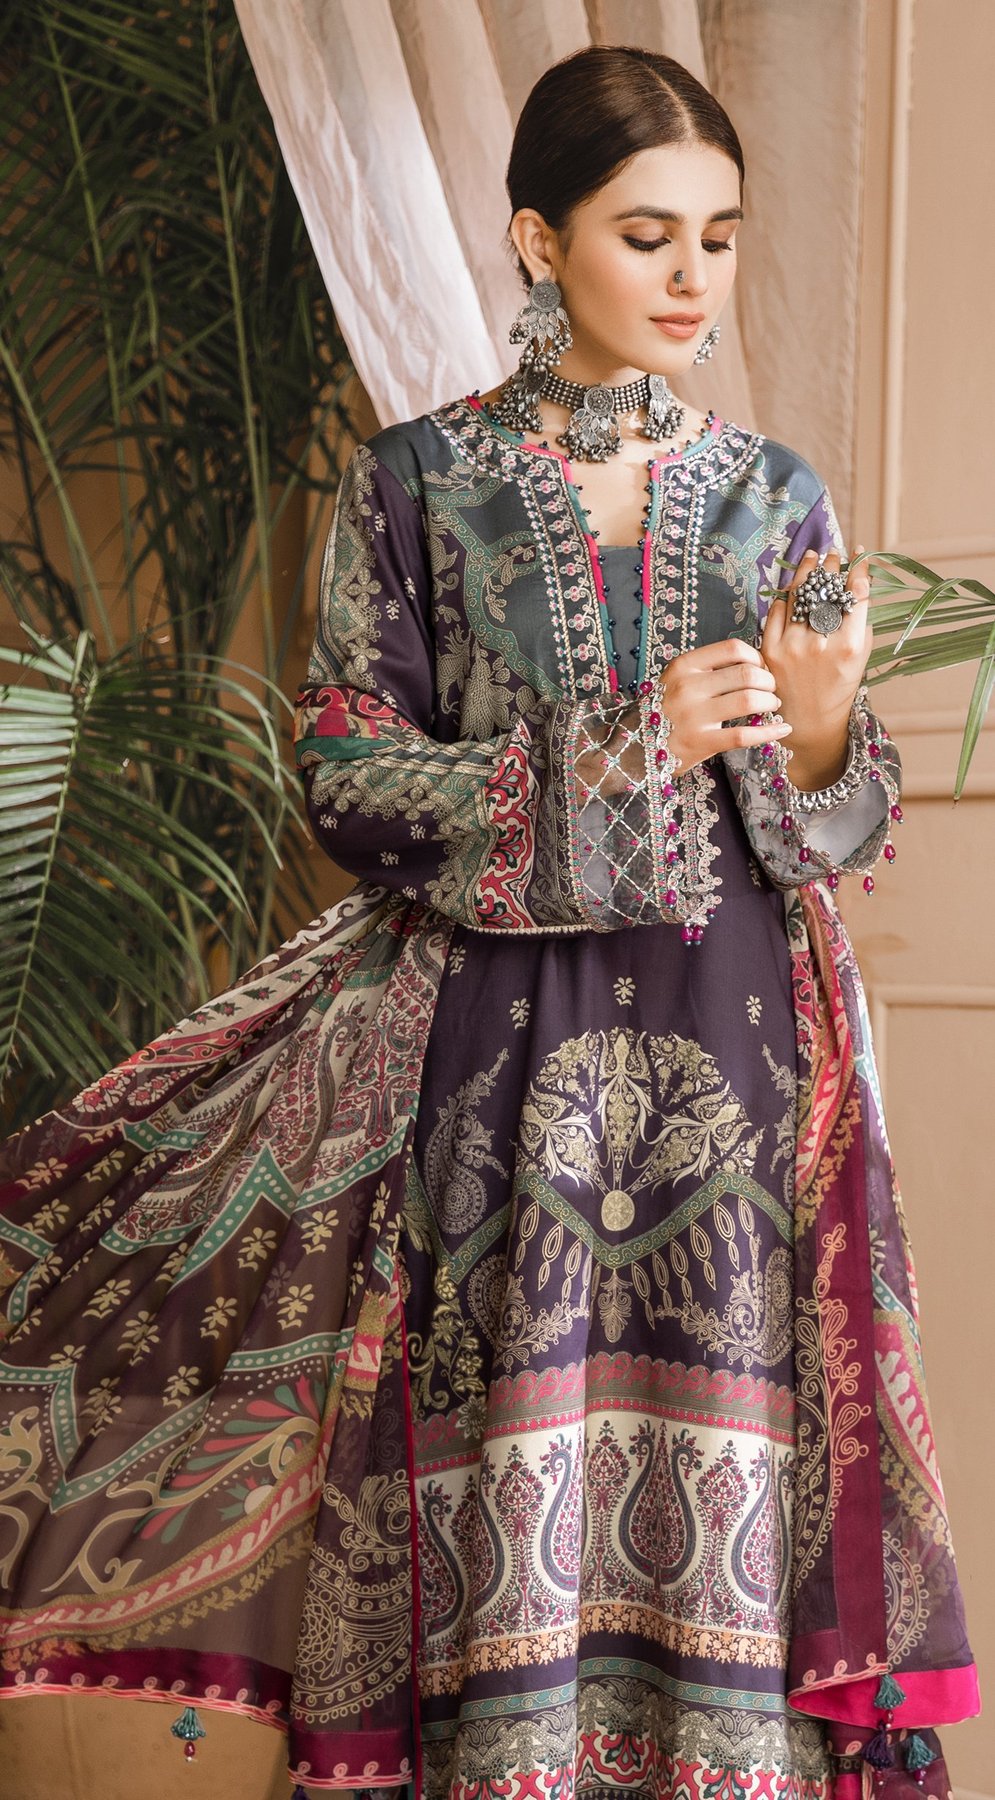 Sahar | Anaya by Kiran Chaudhry | Noor Bano | Unstitched Embroidered Cambric Collection'21